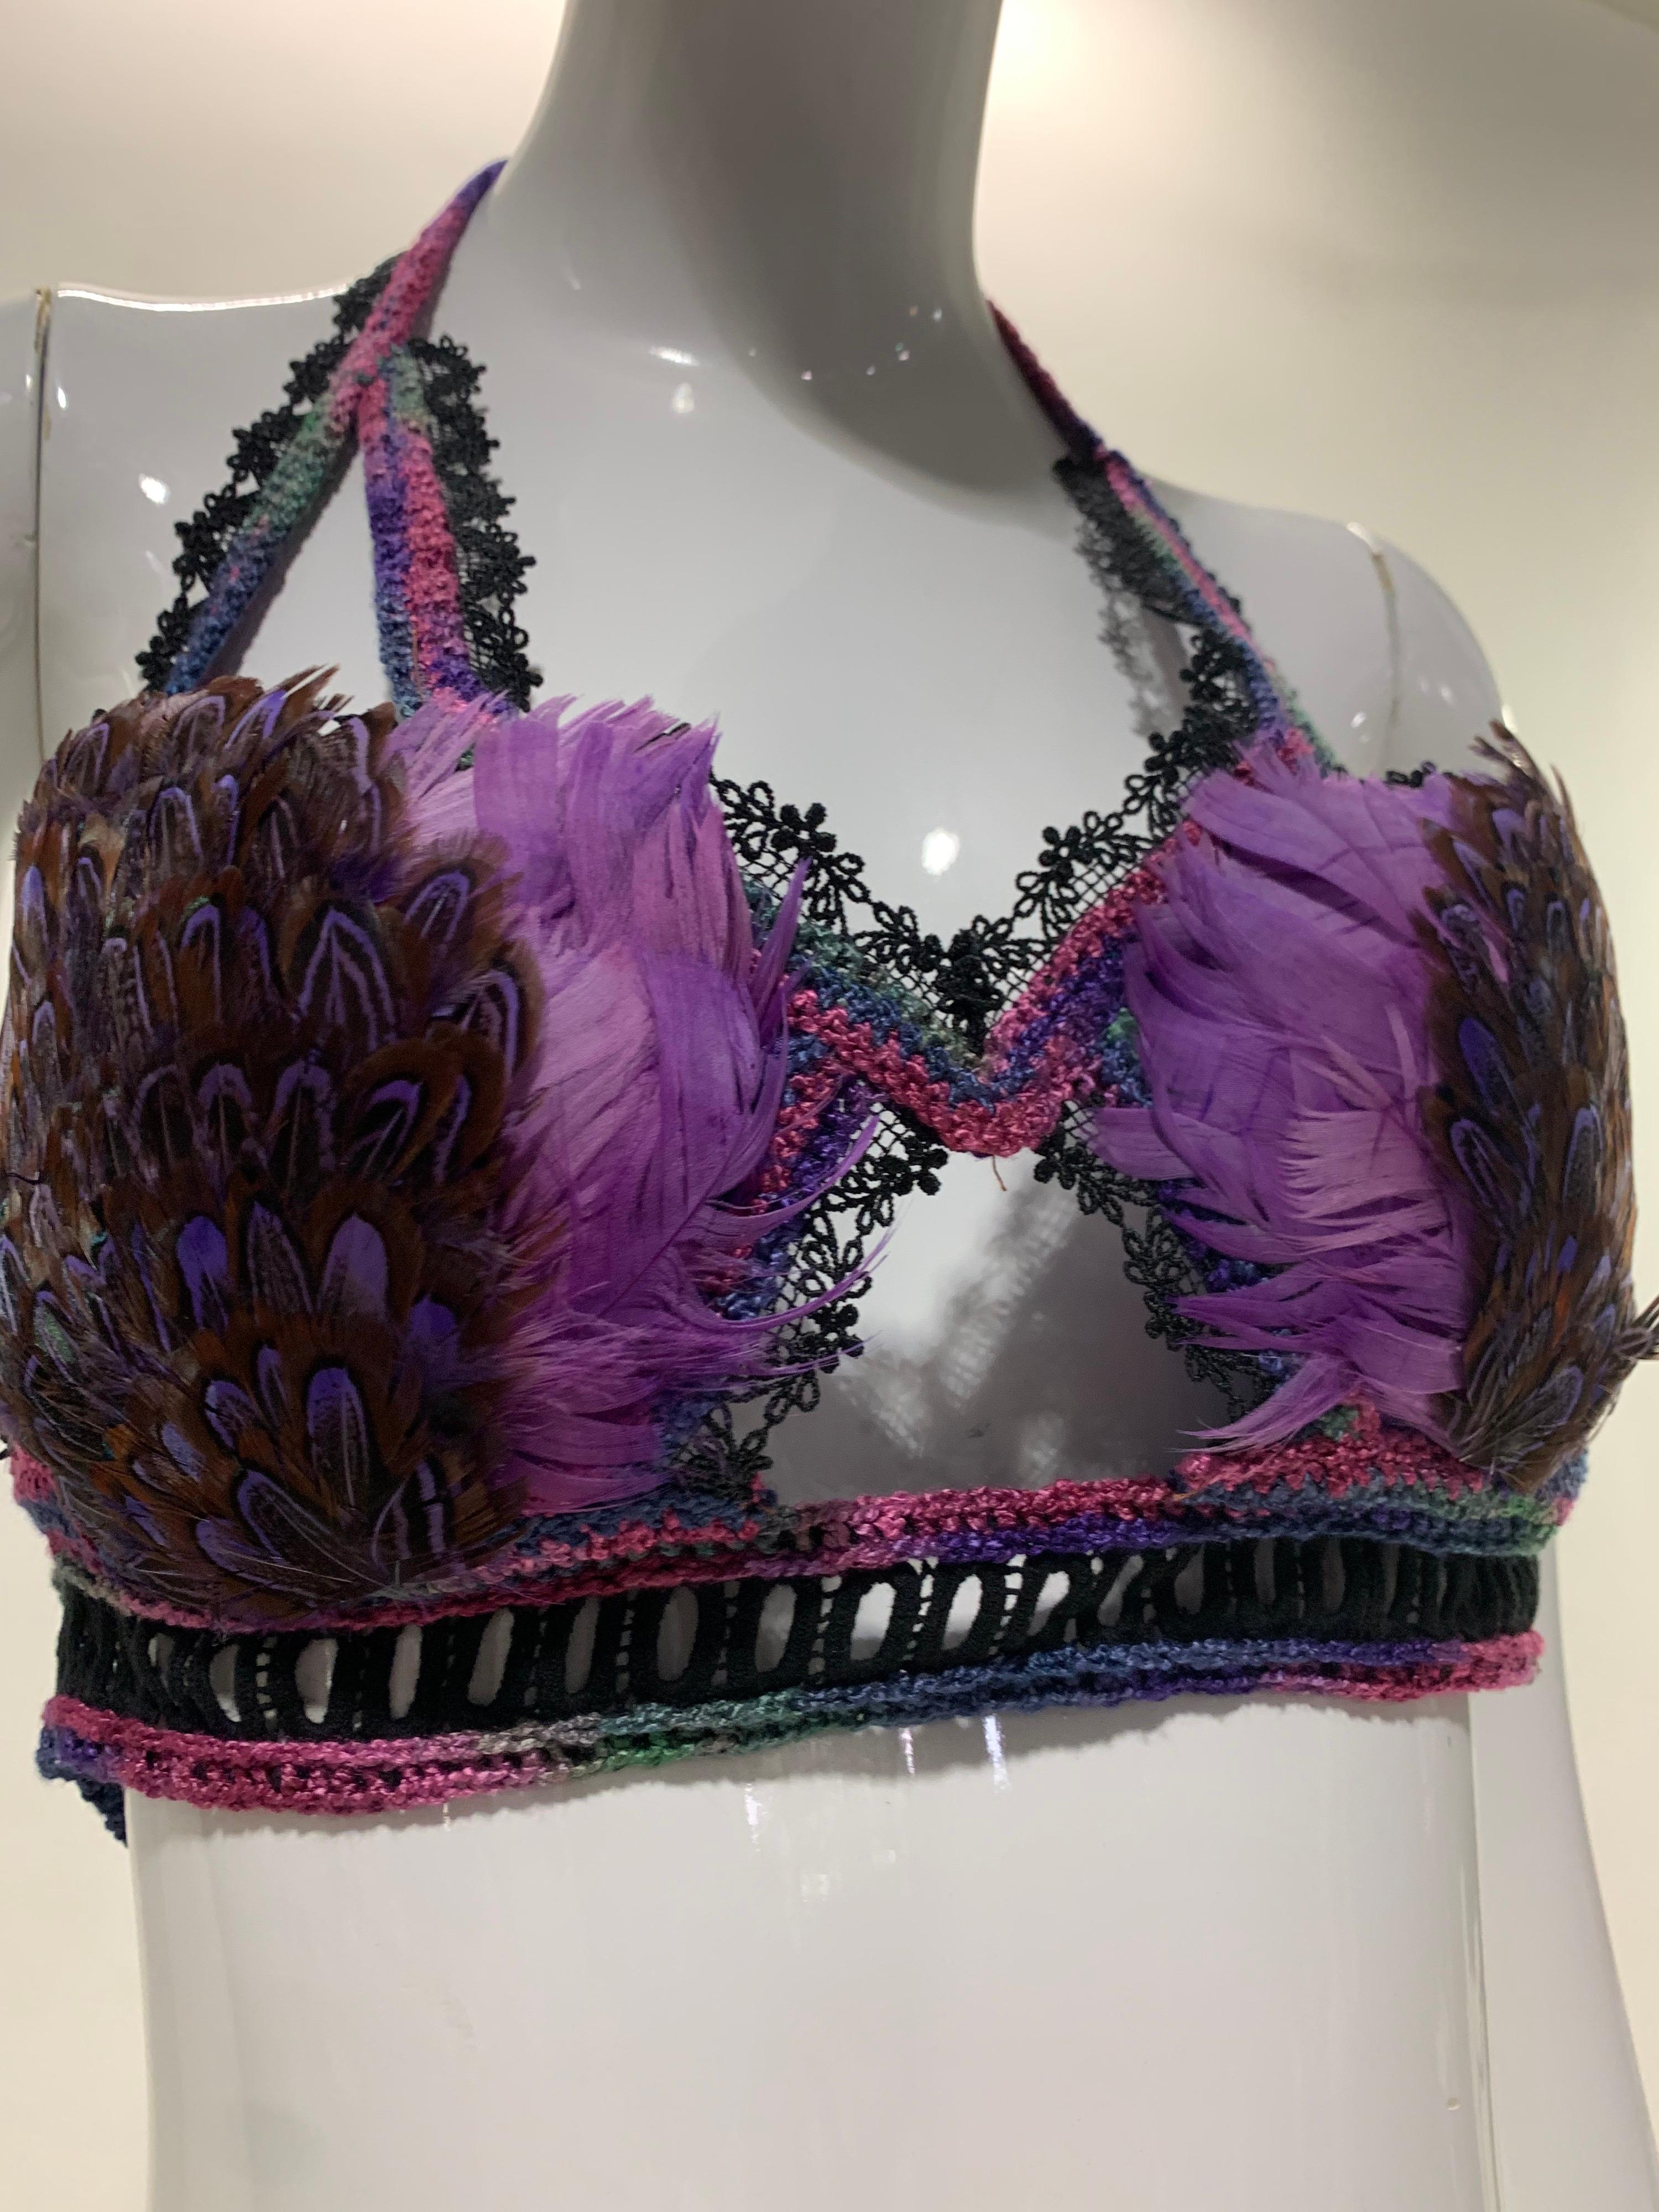 Women's Torso Creations Feathered Lace Bralette in Purple and Black Lace and Crochet For Sale